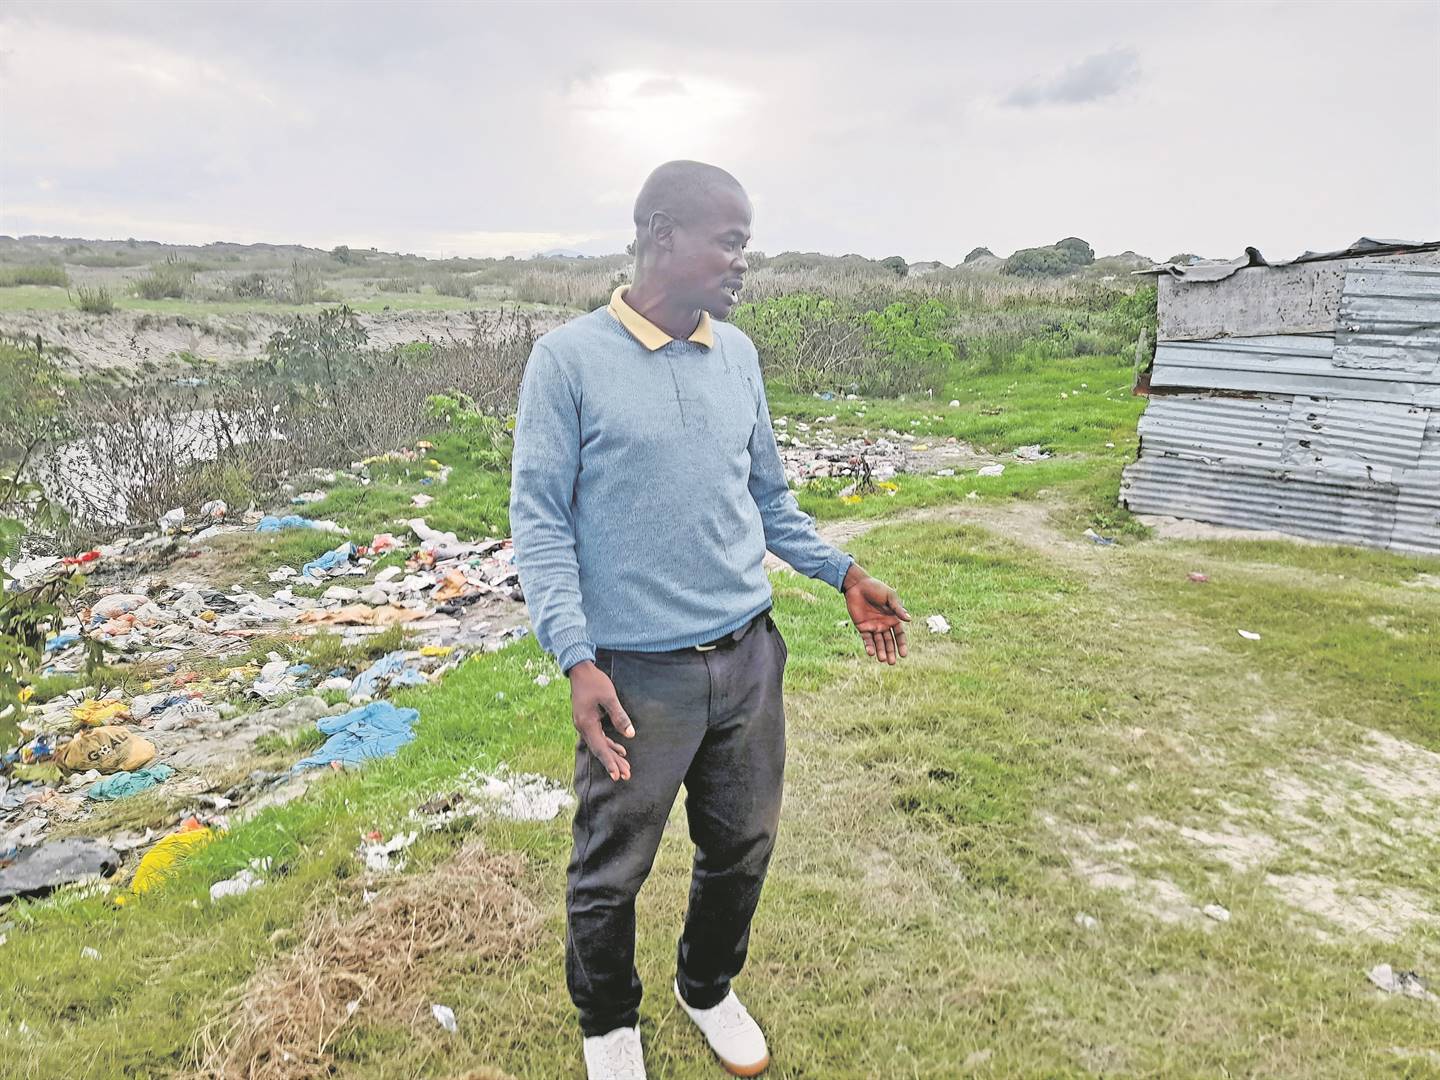 Brandon Qhanga from Dubai informal settlement, in Cape Town, said people use the open space behind his shack to relieve themselves.          Photo by Lulekwa Mbadamane